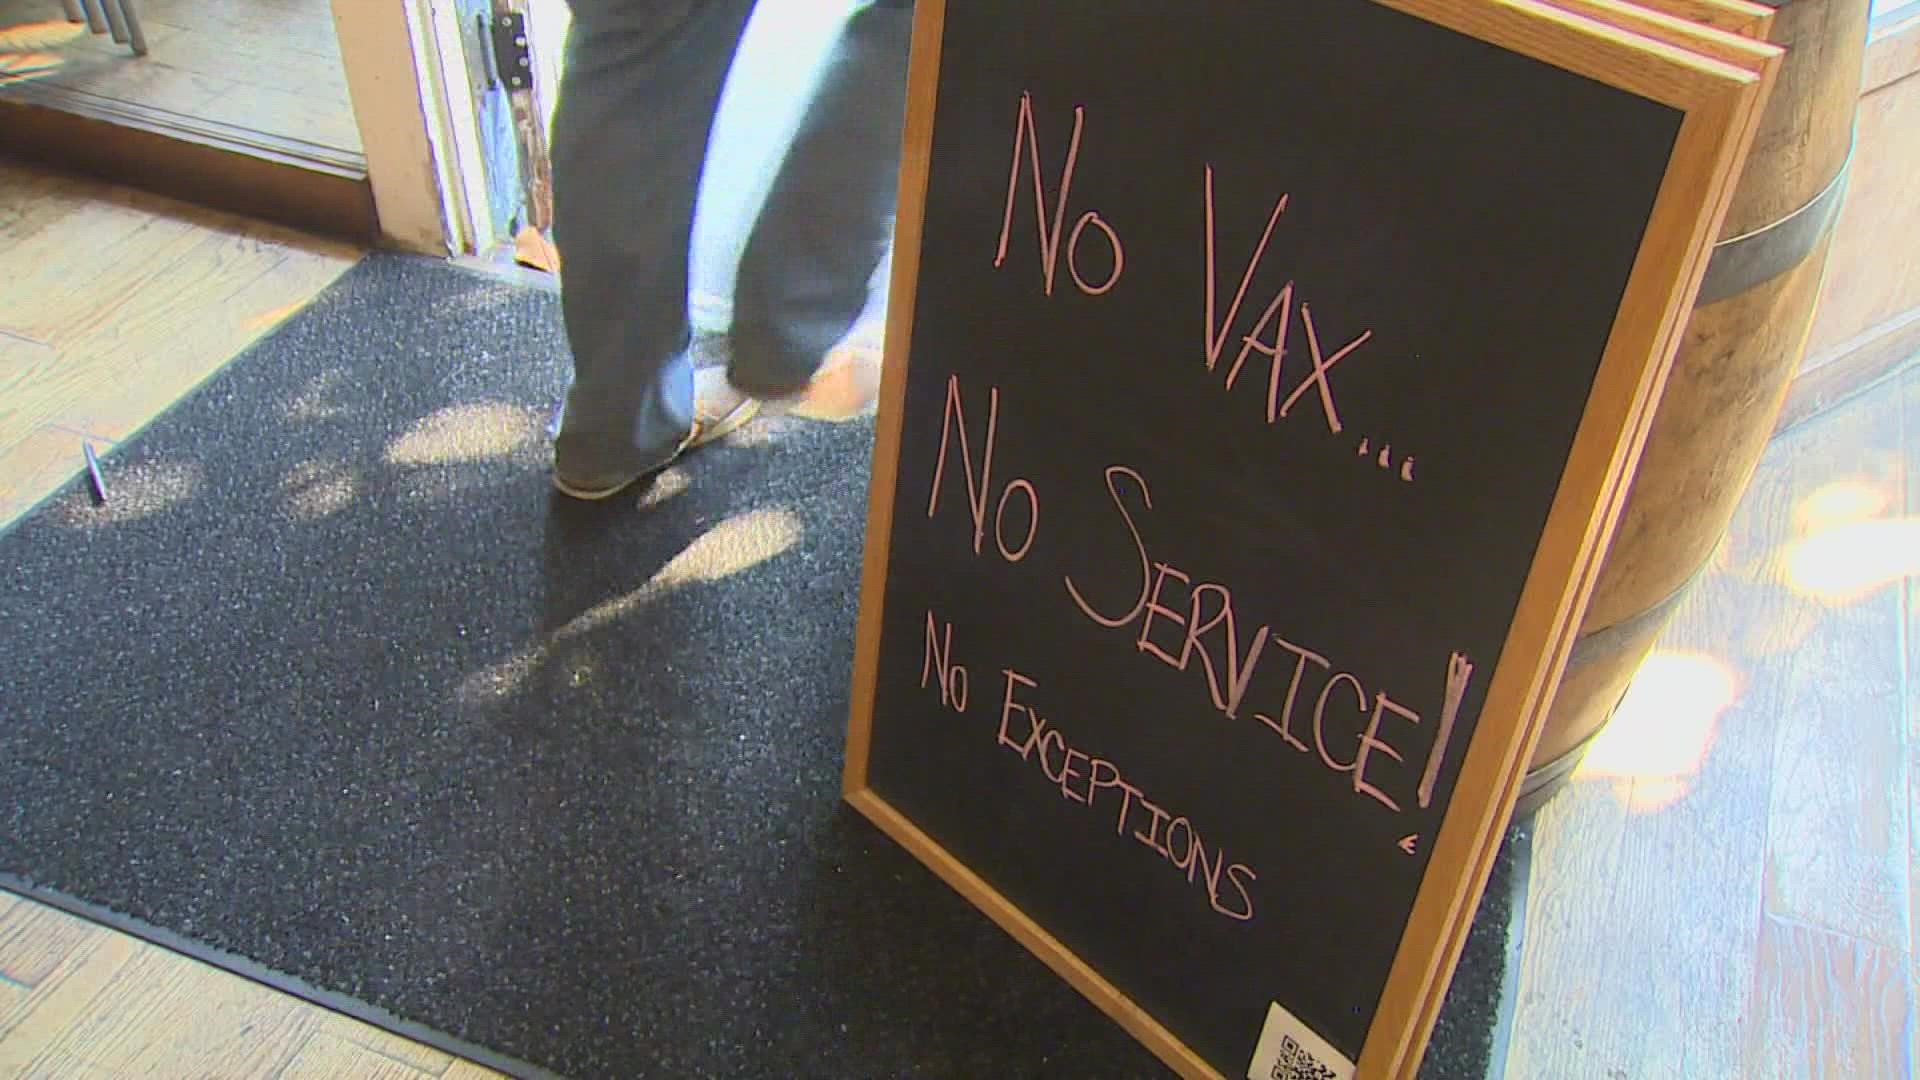 Many bars adopted the policy this weekend after some spots had to shutdown because vaccinated staff tested positive for COVID-19.